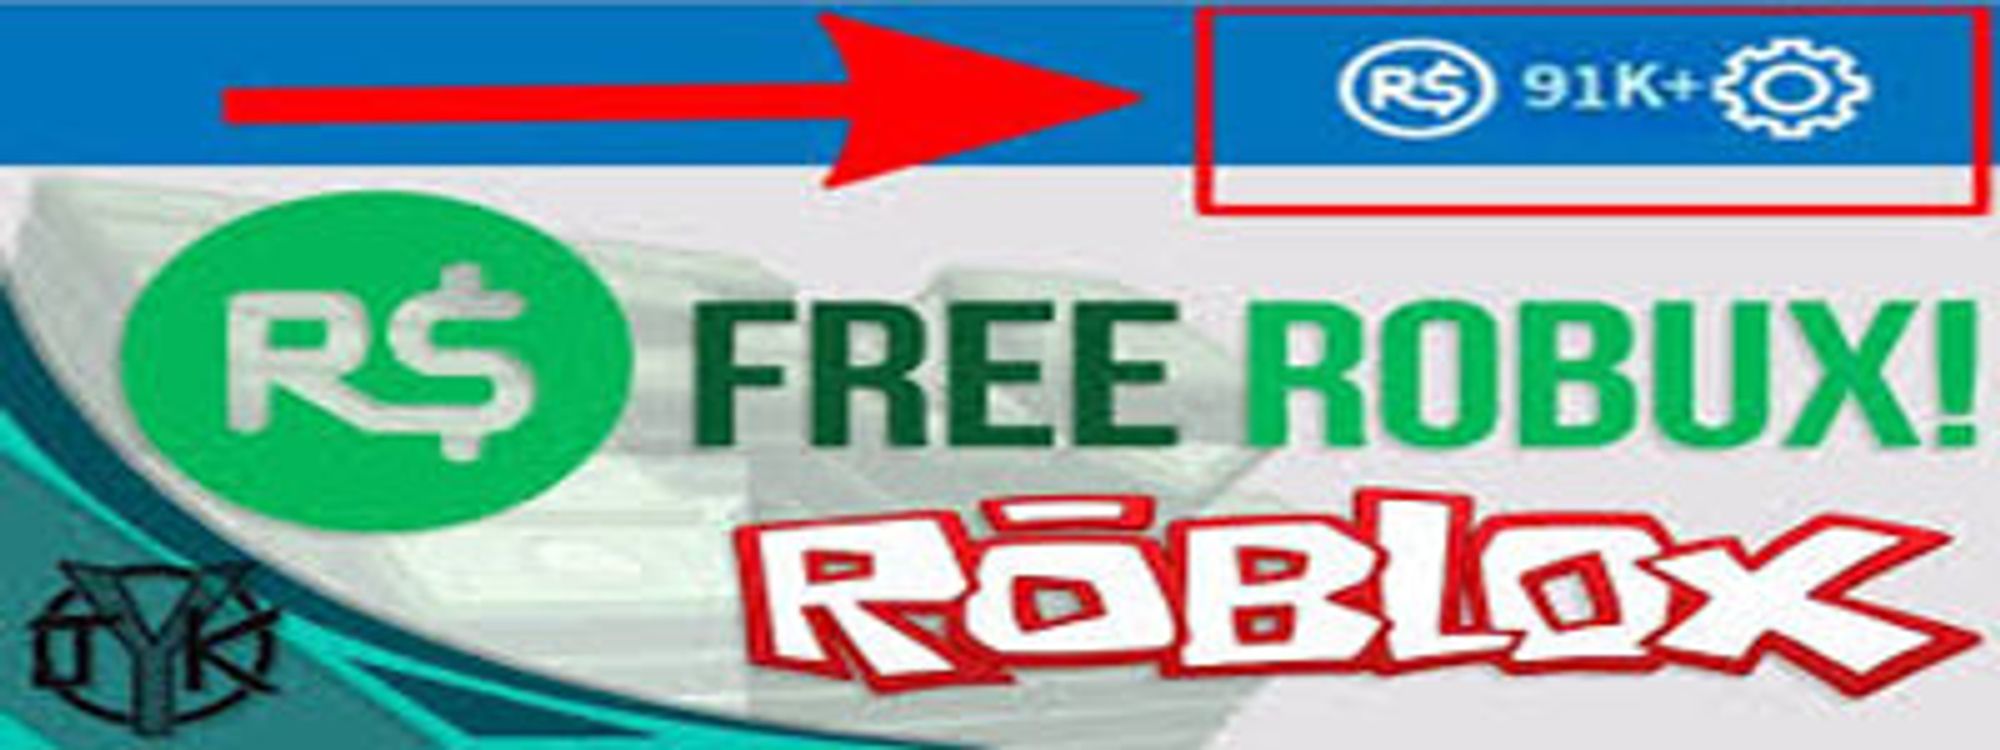 Roblox Robux Free Roblox Robux Codes With Skins Password Account 2020 - resources generator roblox